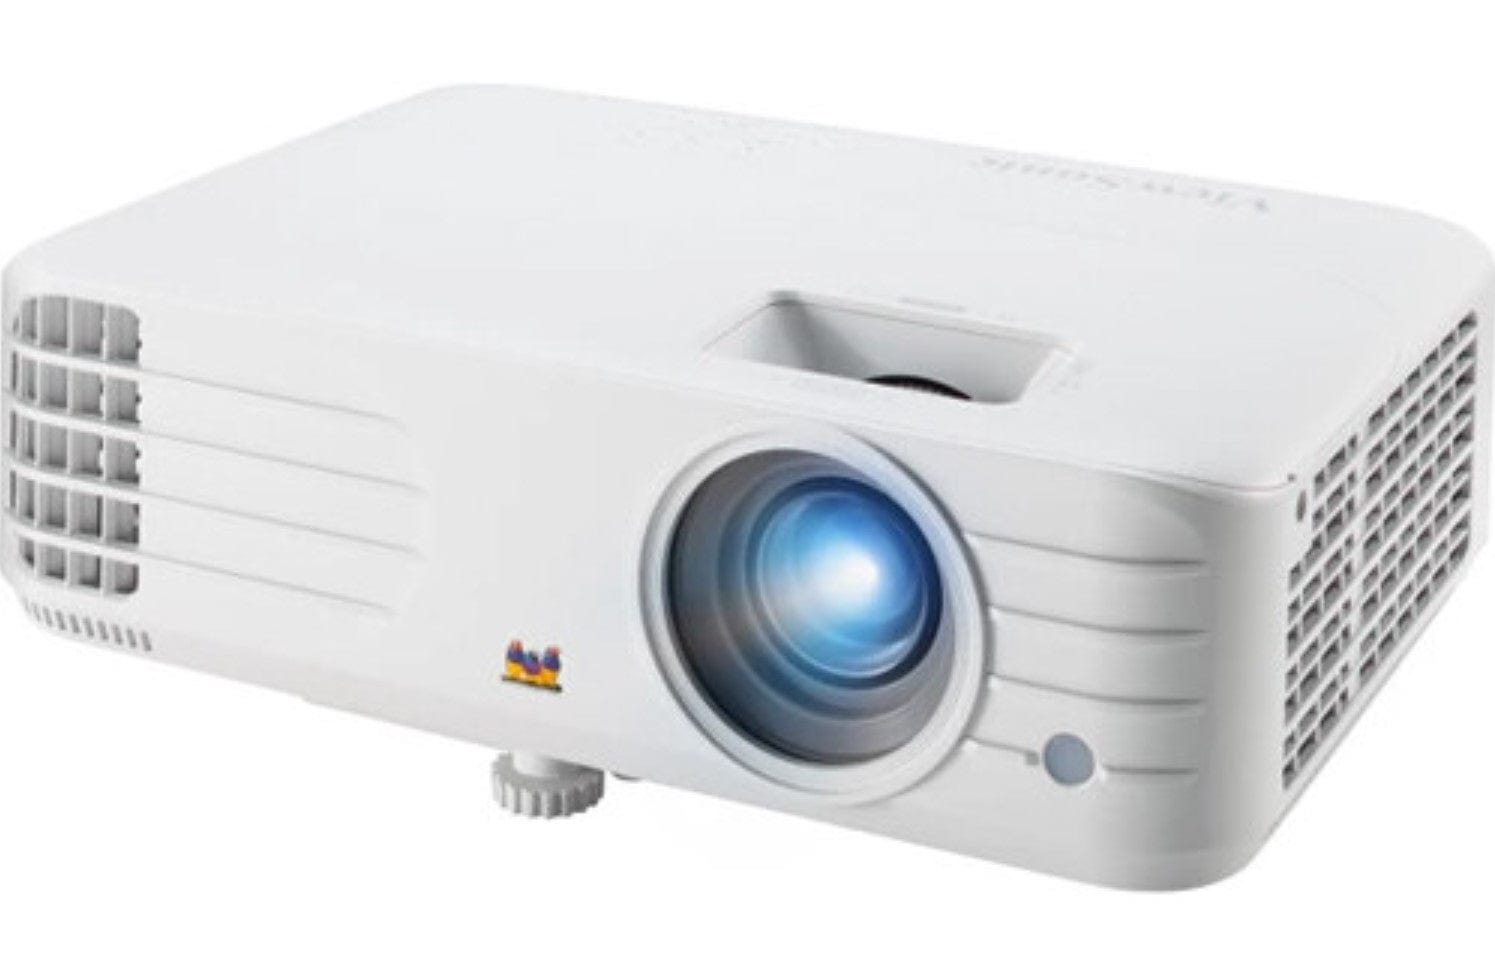 ViewSonic PG706WU-S 4000 Lumens WUXGA Projector with RJ45 LAN Control Vertical Keystoning and Optical Zoom for Home and Office - Certified Refurbished